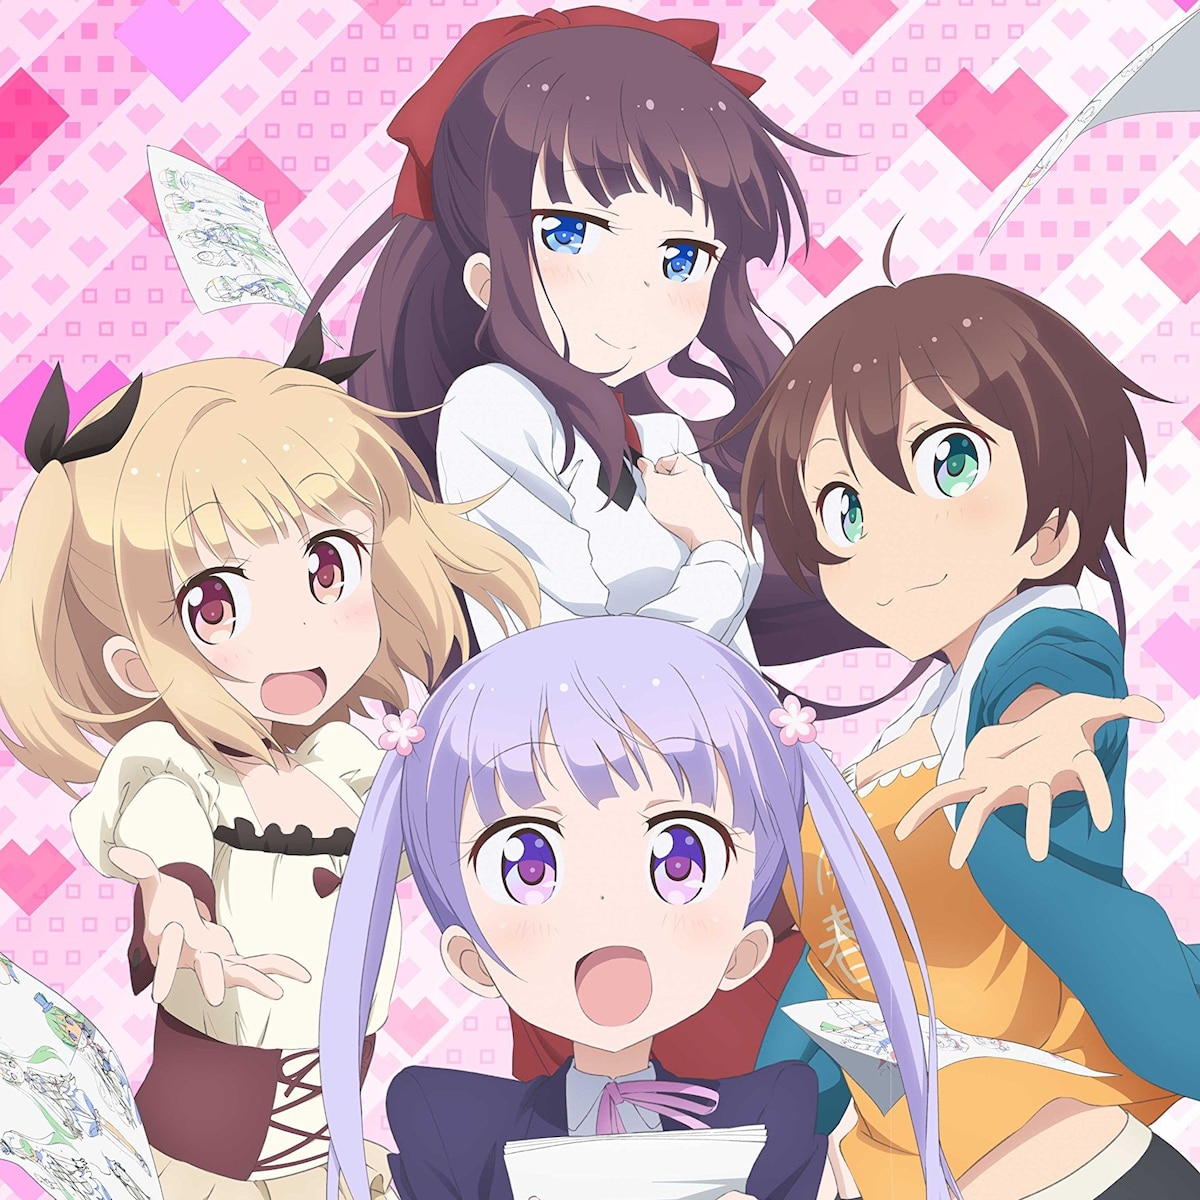 NEW GAME! - MAD